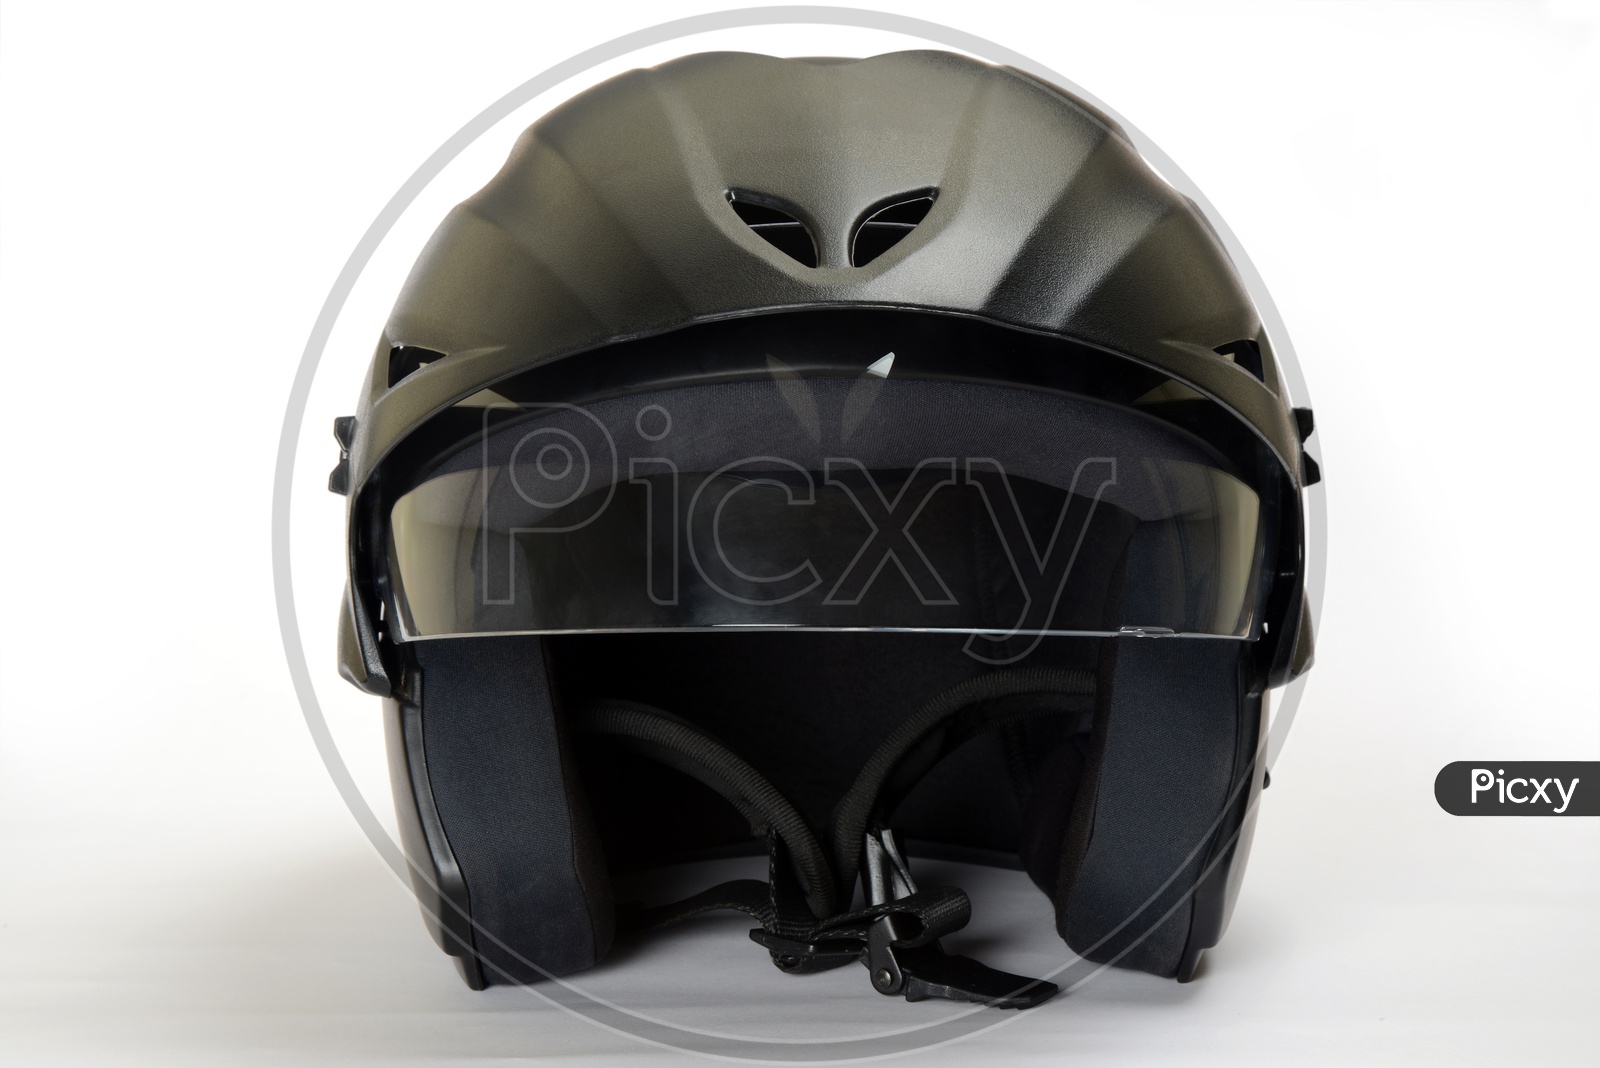 Black Helmet, an essential accessory for motorcycle